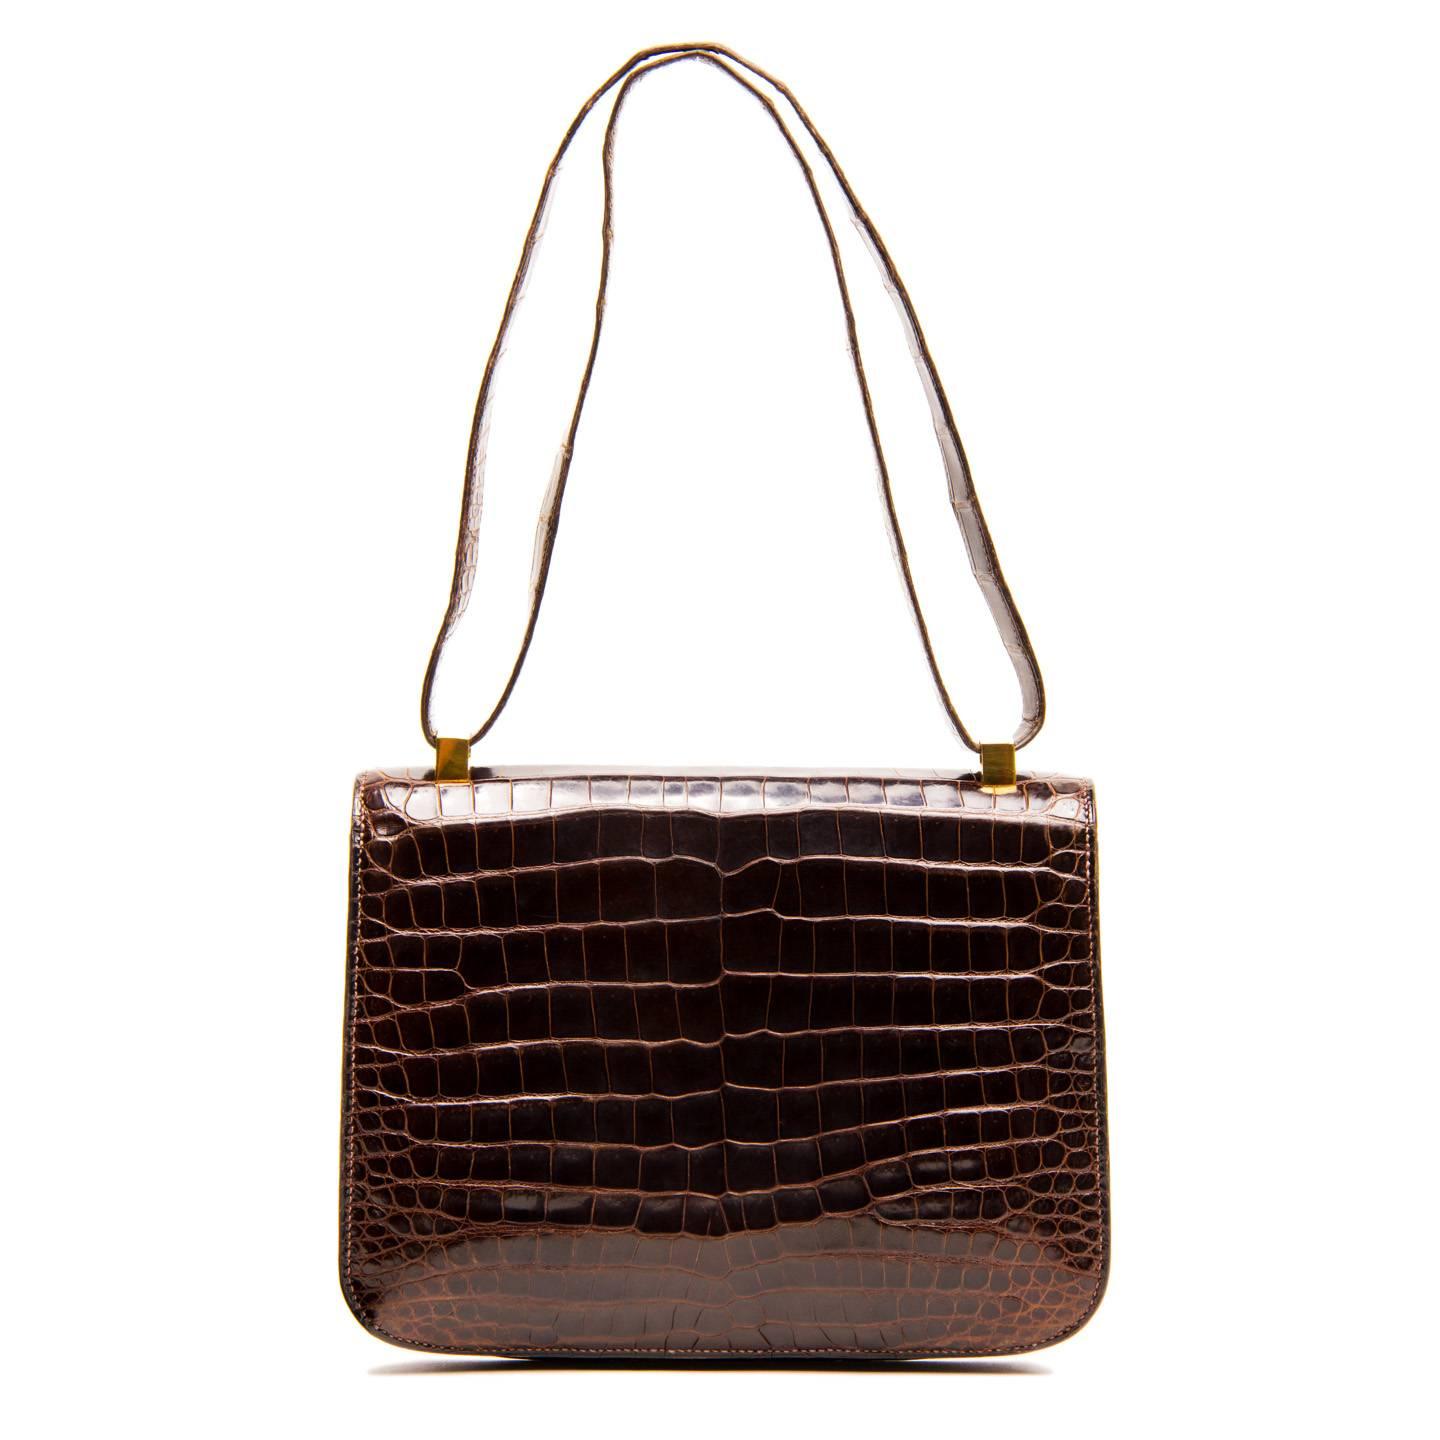 Hermès Brown Crocodile Constance 23cm Bag In Excellent Condition For Sale In Brooklyn, NY